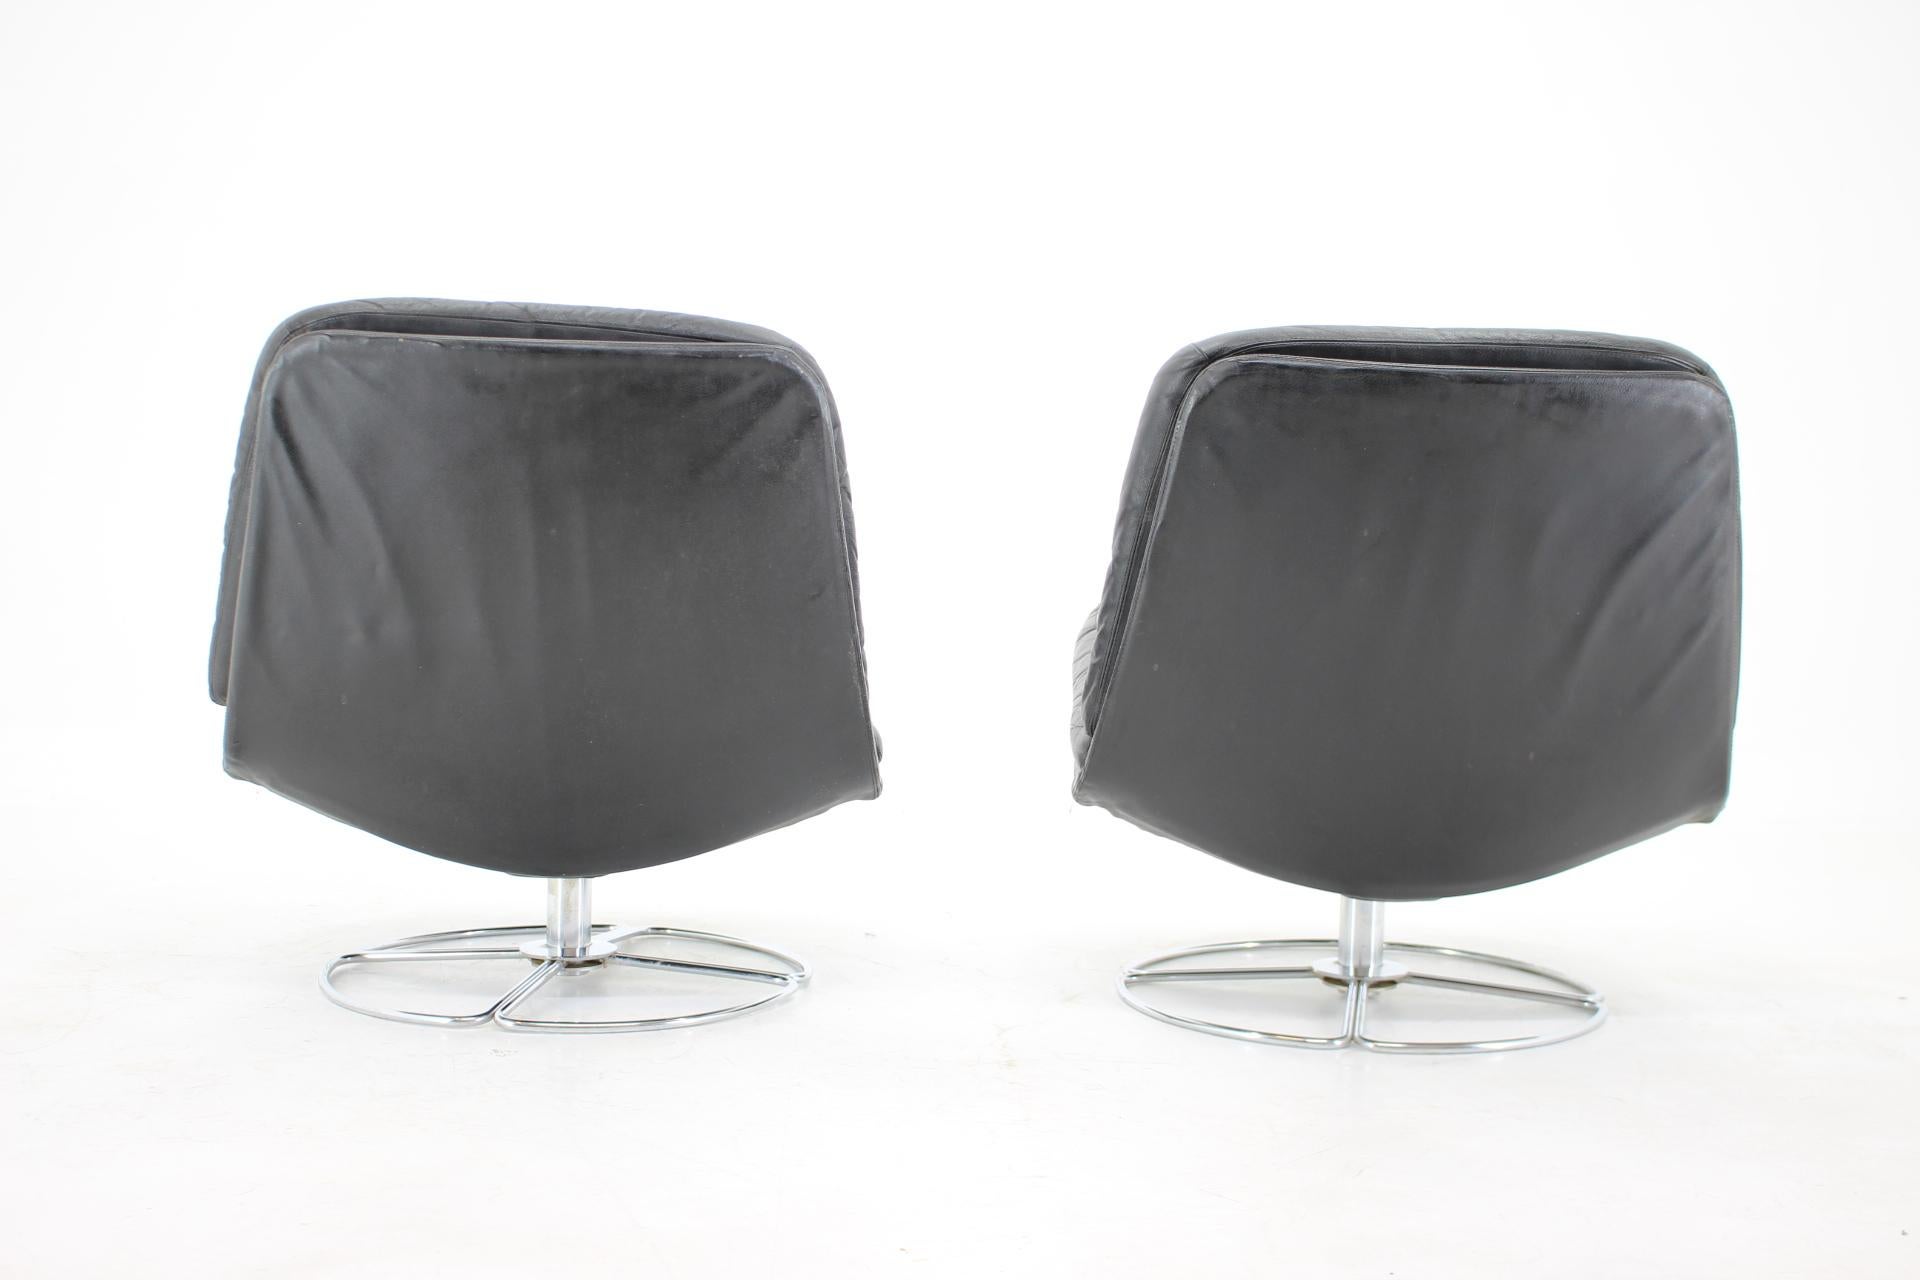 1970s Pair of PEEM Leather Lounge Chairs, Finland In Good Condition For Sale In Praha, CZ